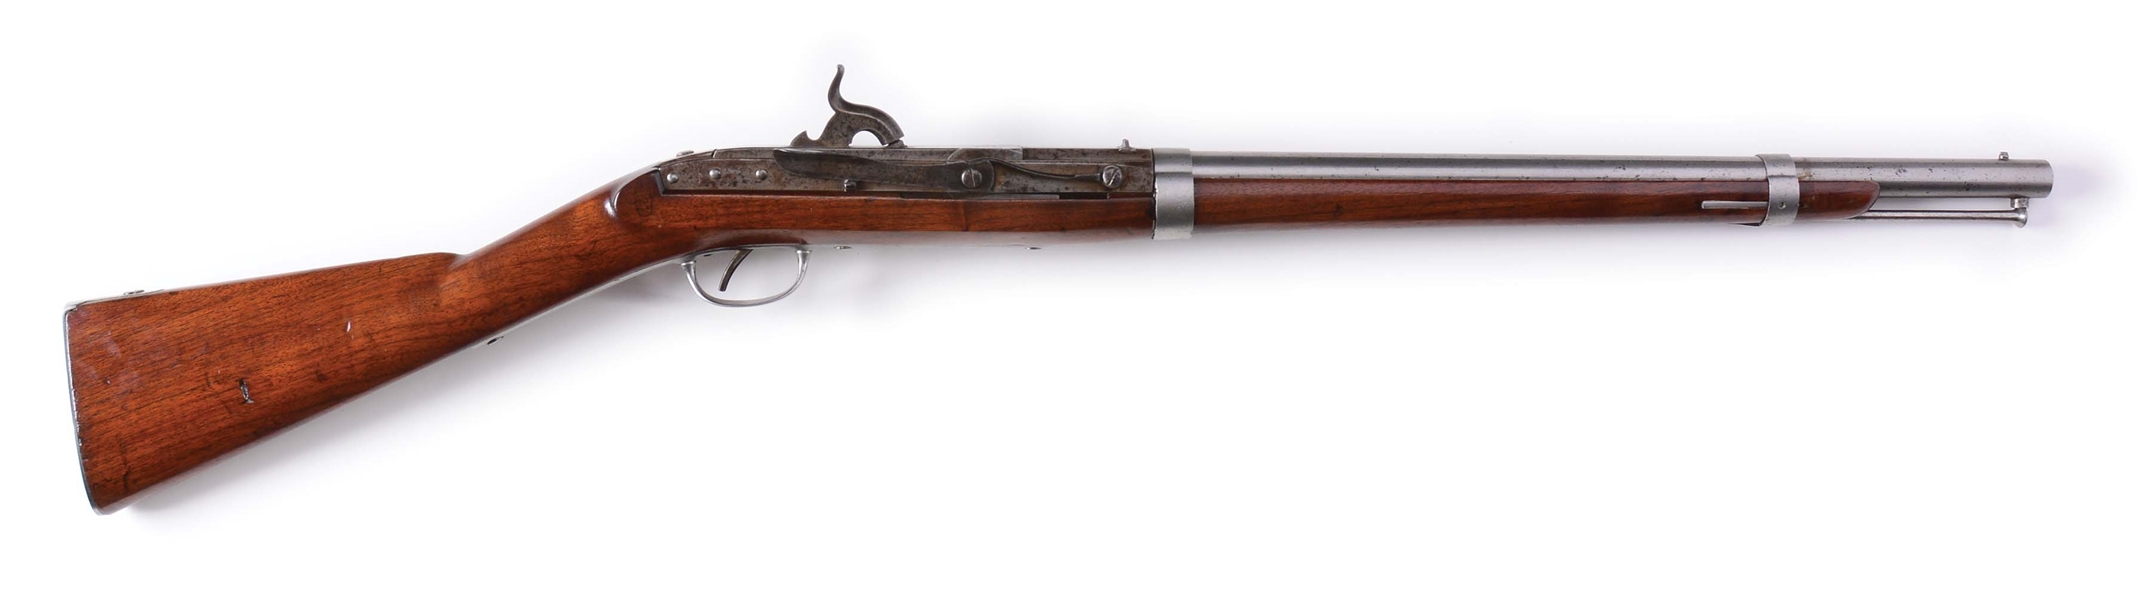 (A) BREECHLOADING MODEL 1843 SMOOTHBORE S. NORTH PERCUSSION HALL CARBINE.